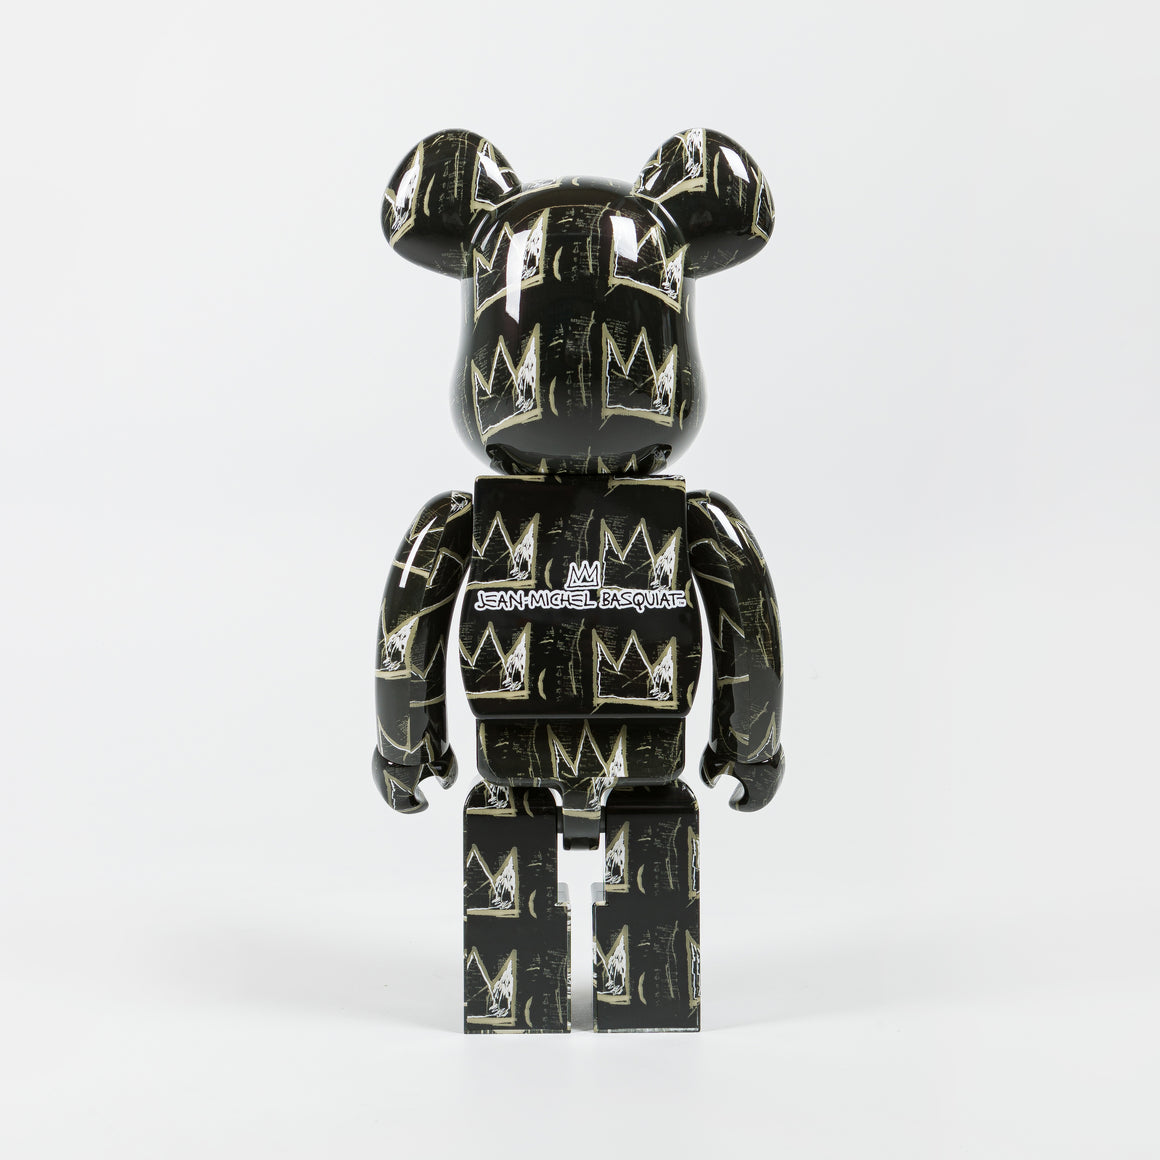 Medicom Toy - Be@rbrick × Basquiat 1000% #8 - UP THERE